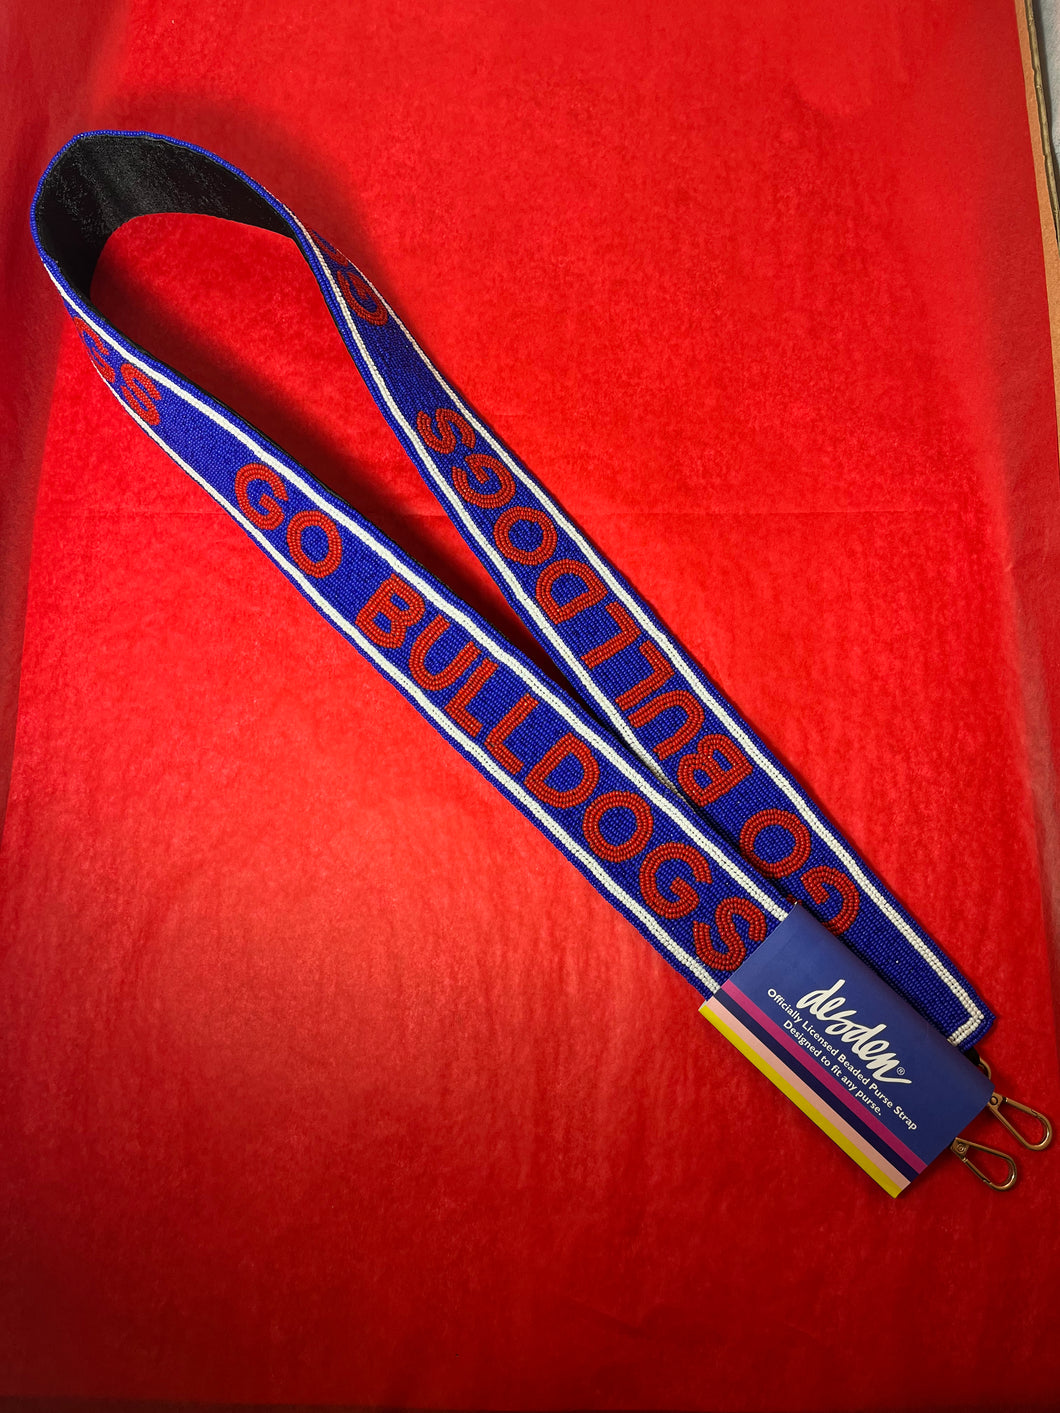 Louisiana Tech purse strap in Blue and Red by Desden